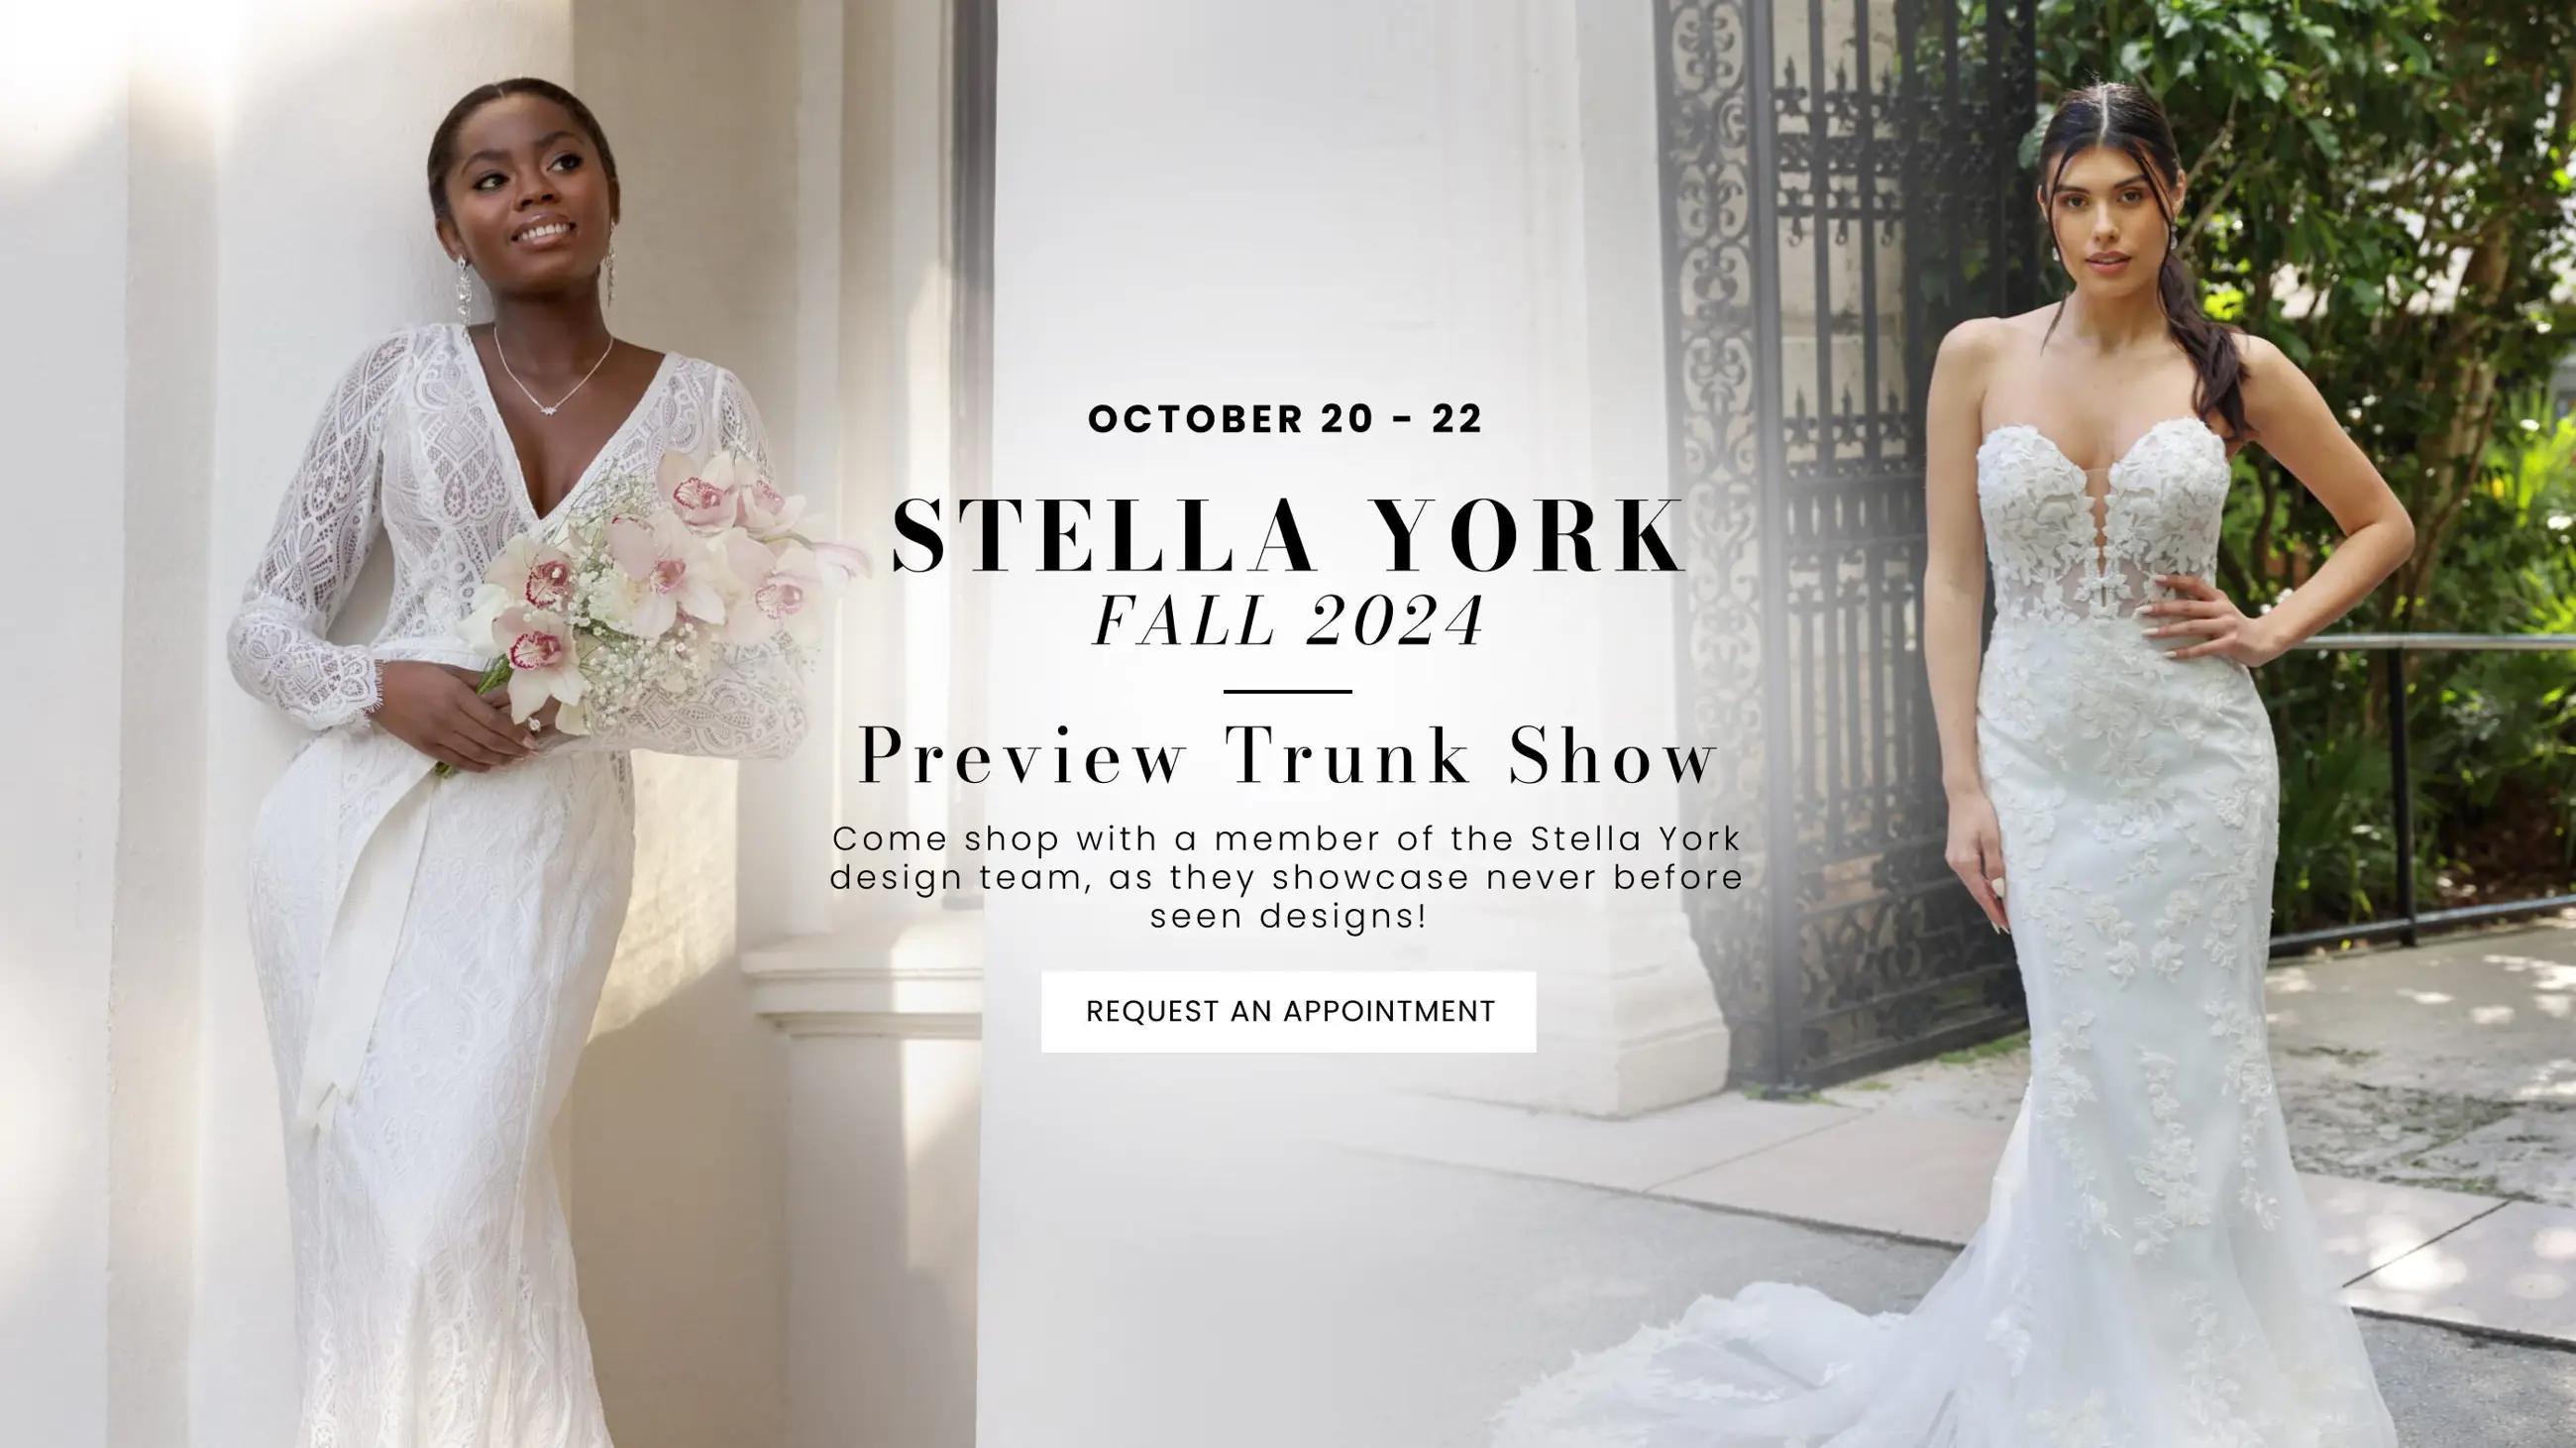 Stella York Preview Trunk Show at Wendy's Bridal